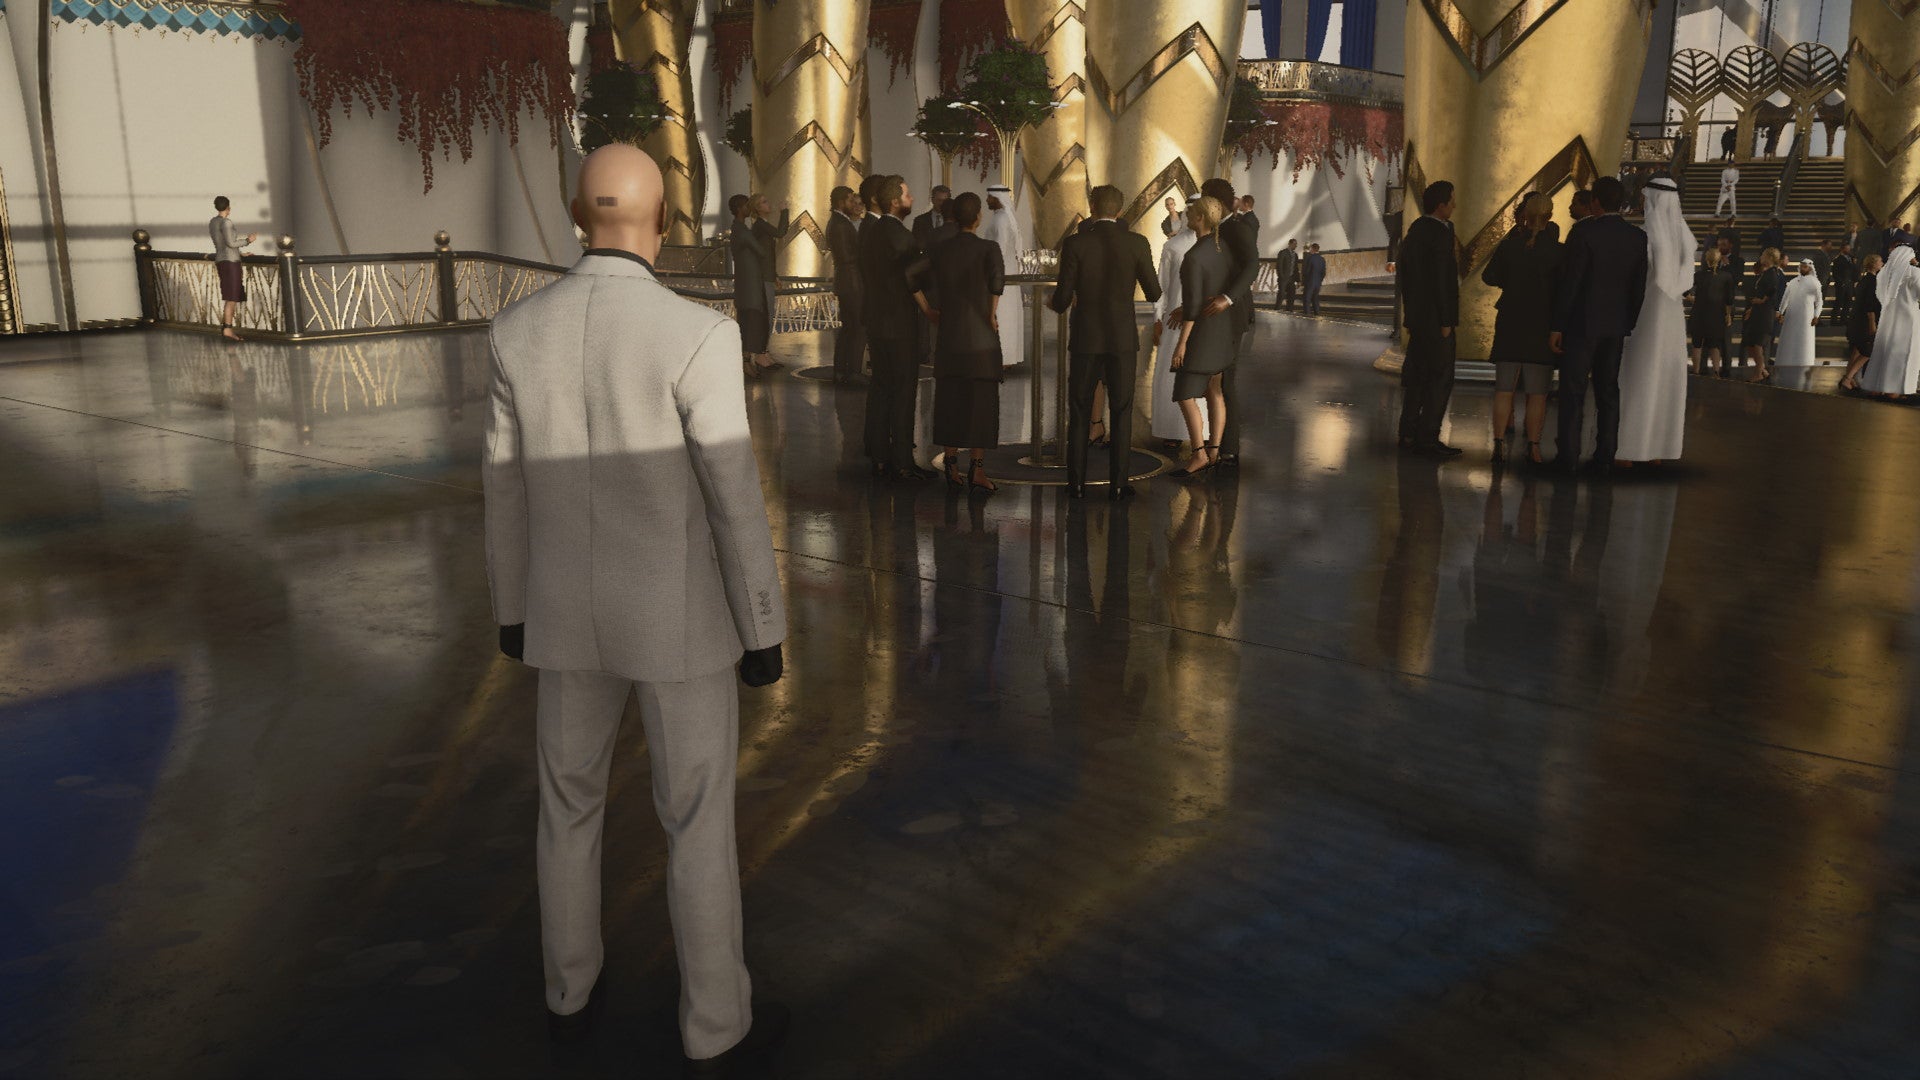 A screenshot of Agent 47 standing in a shiny reception hall from Hitman 3's Dubai level